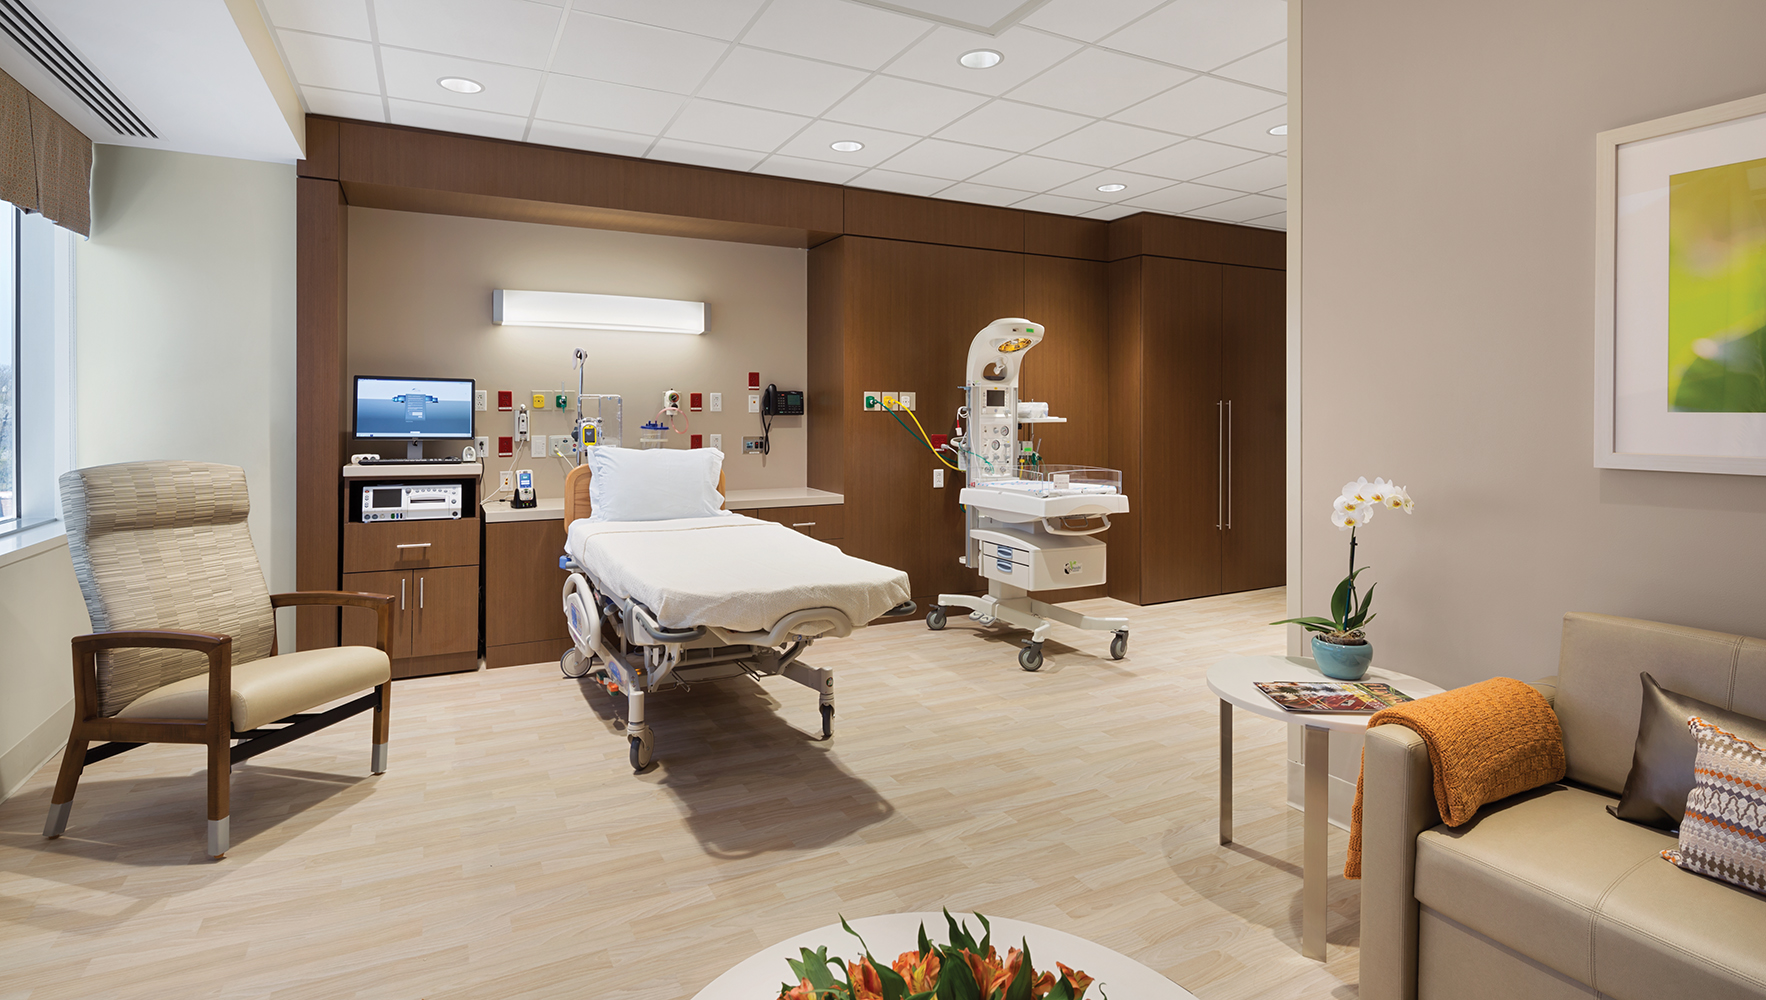 Unity headwall luminaire provides beautiful illumination for a large patient room lighting design with a seating area.